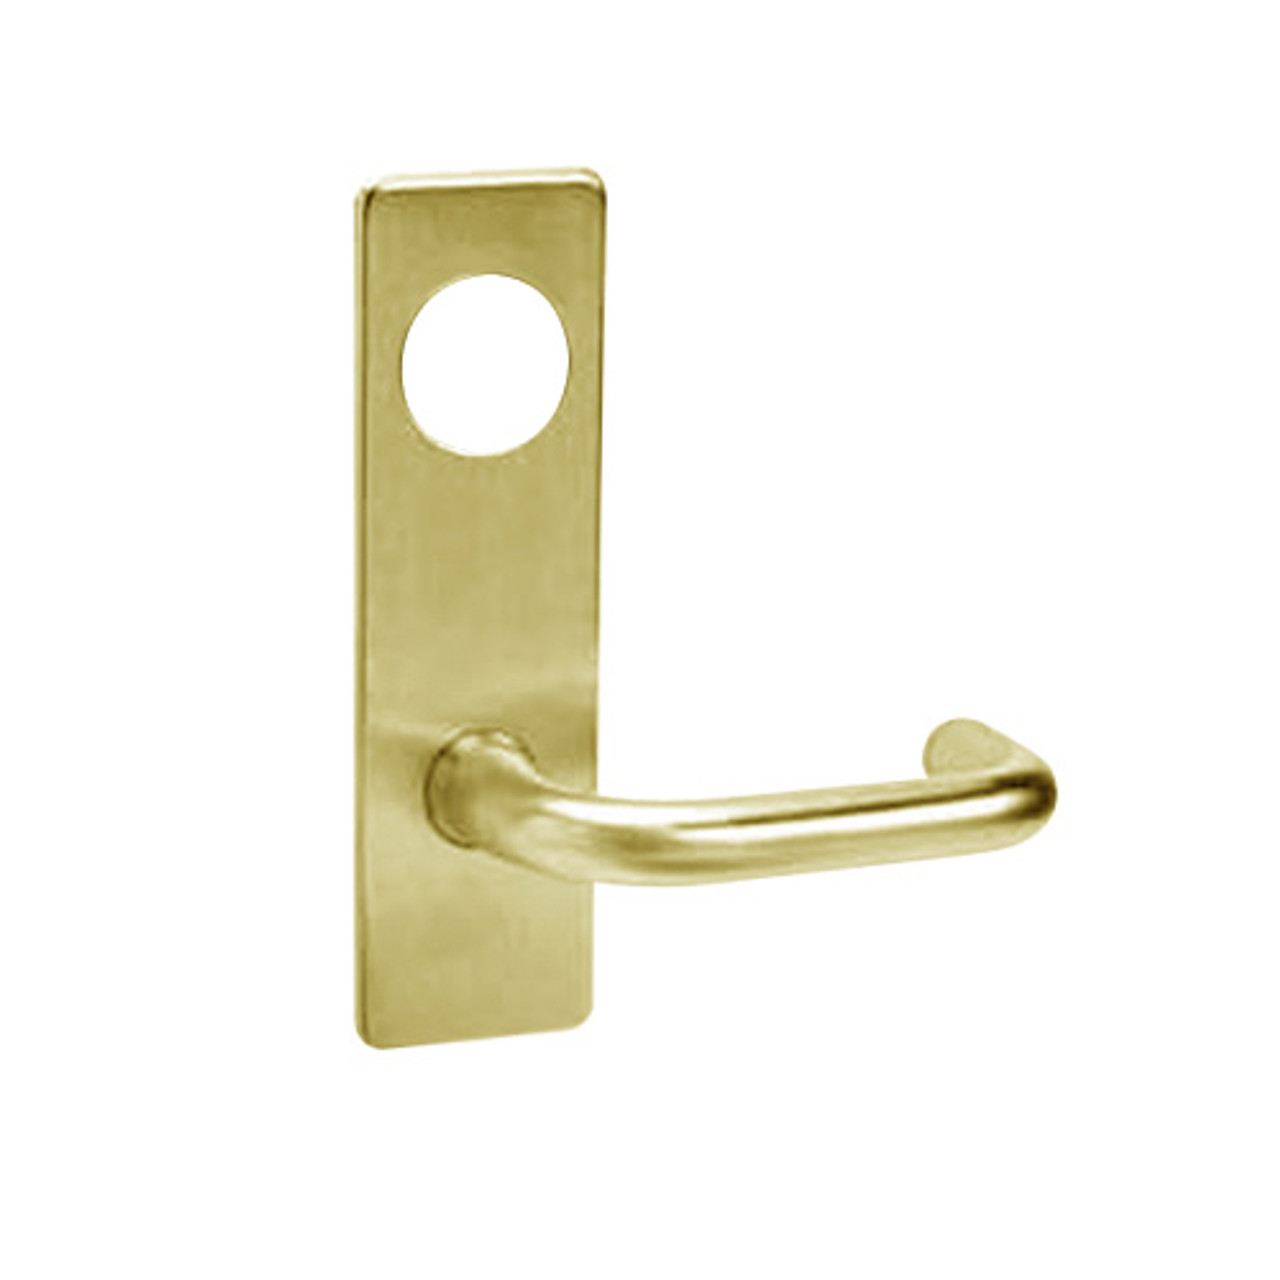 ML2056-LSP-606-LC Corbin Russwin ML2000 Series Mortise Classroom Locksets with Lustra Lever in Satin Brass